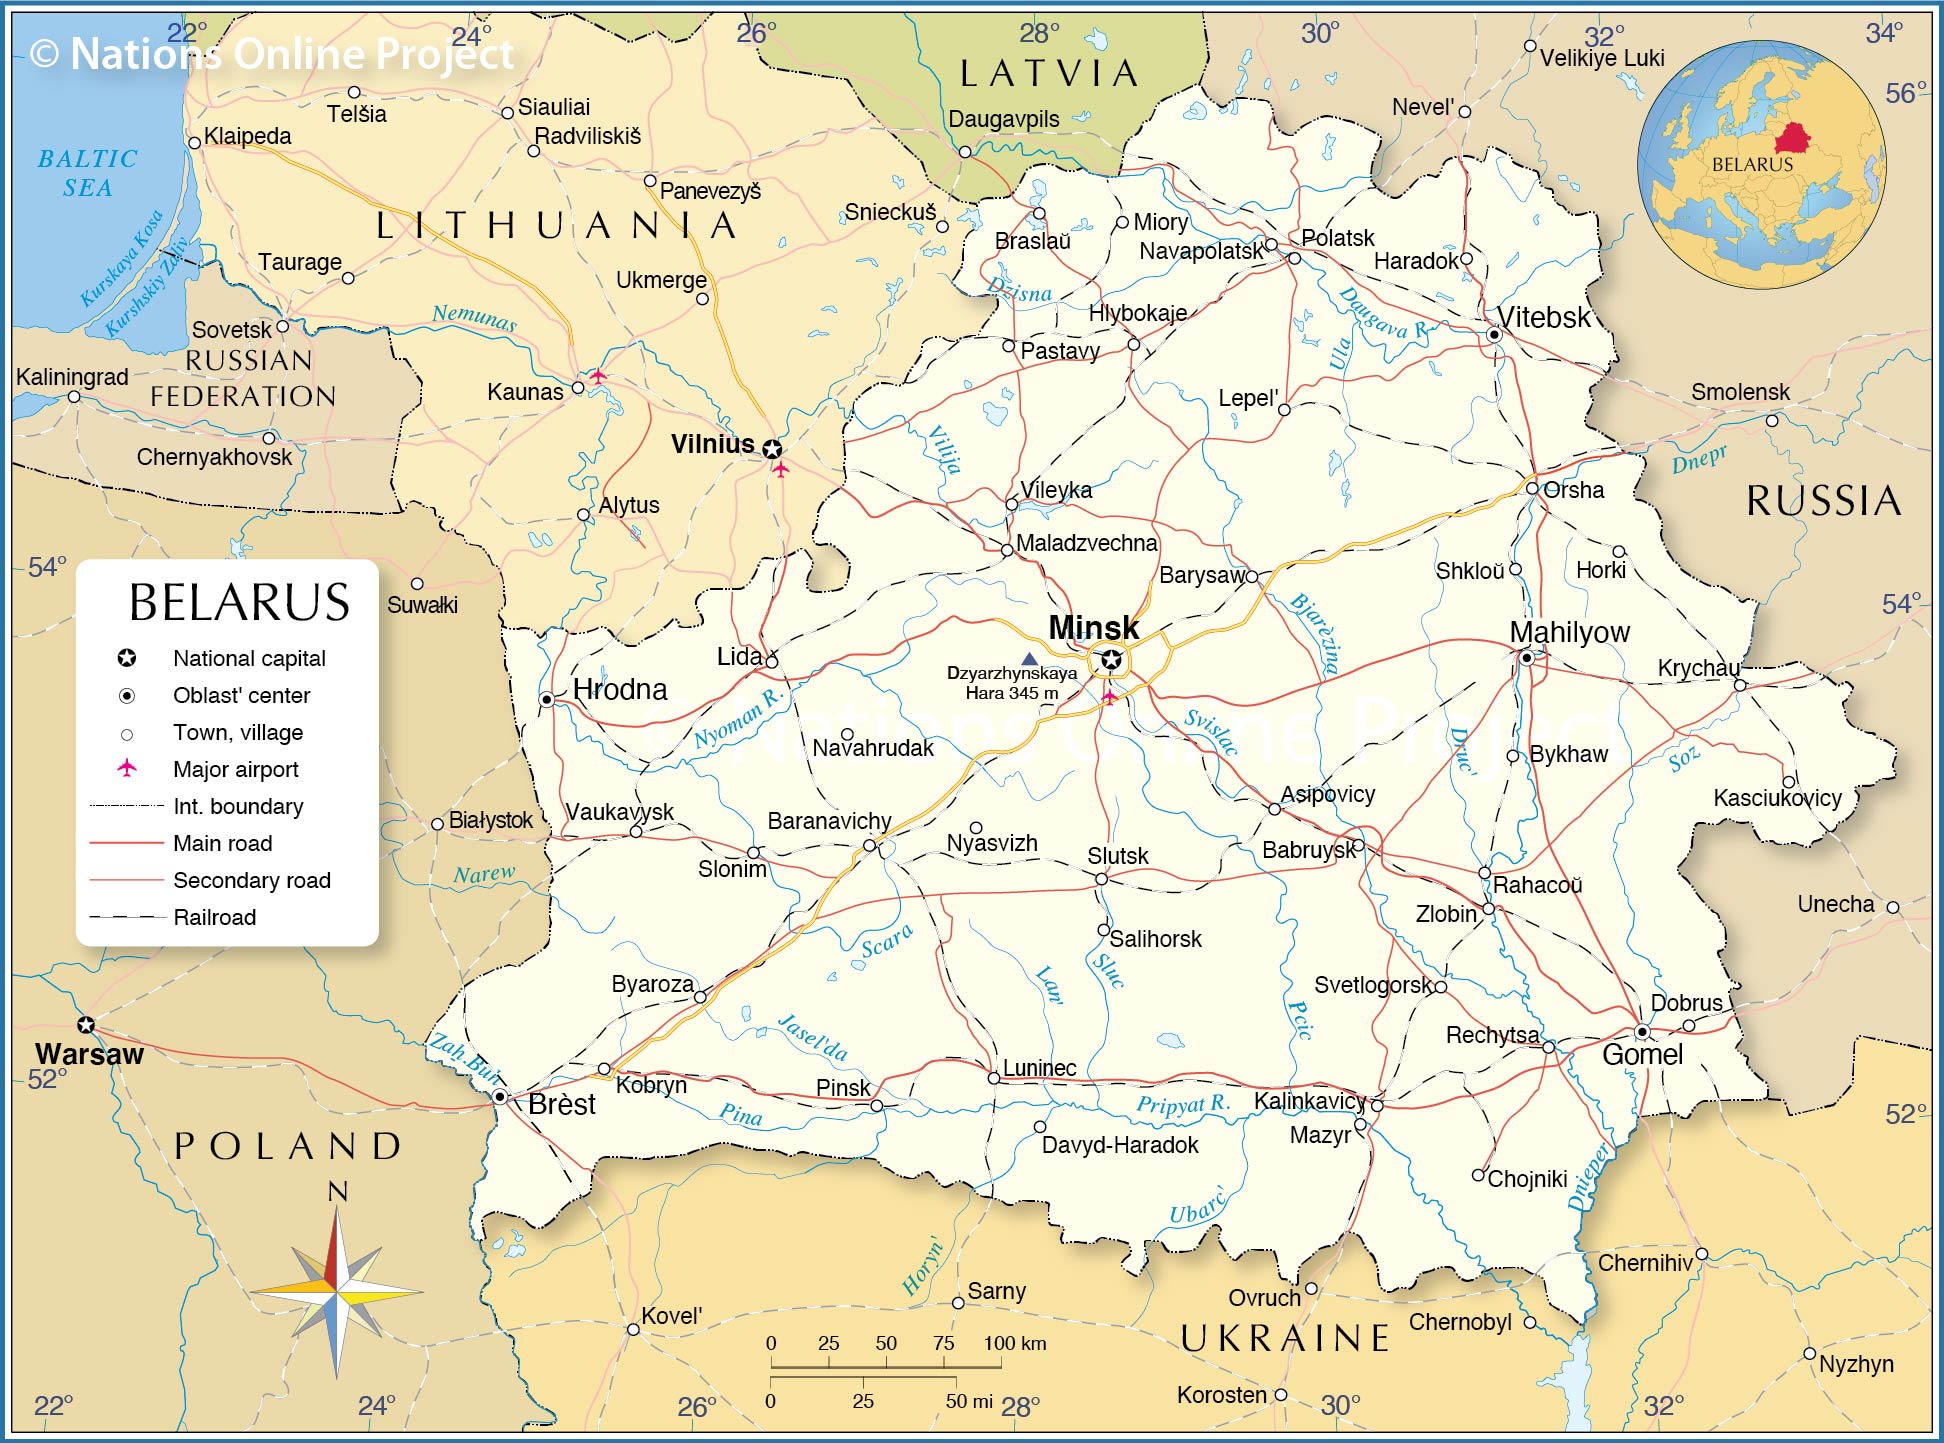 Poland And Belarus Map Political Map Of Belarus - Nations Online Project